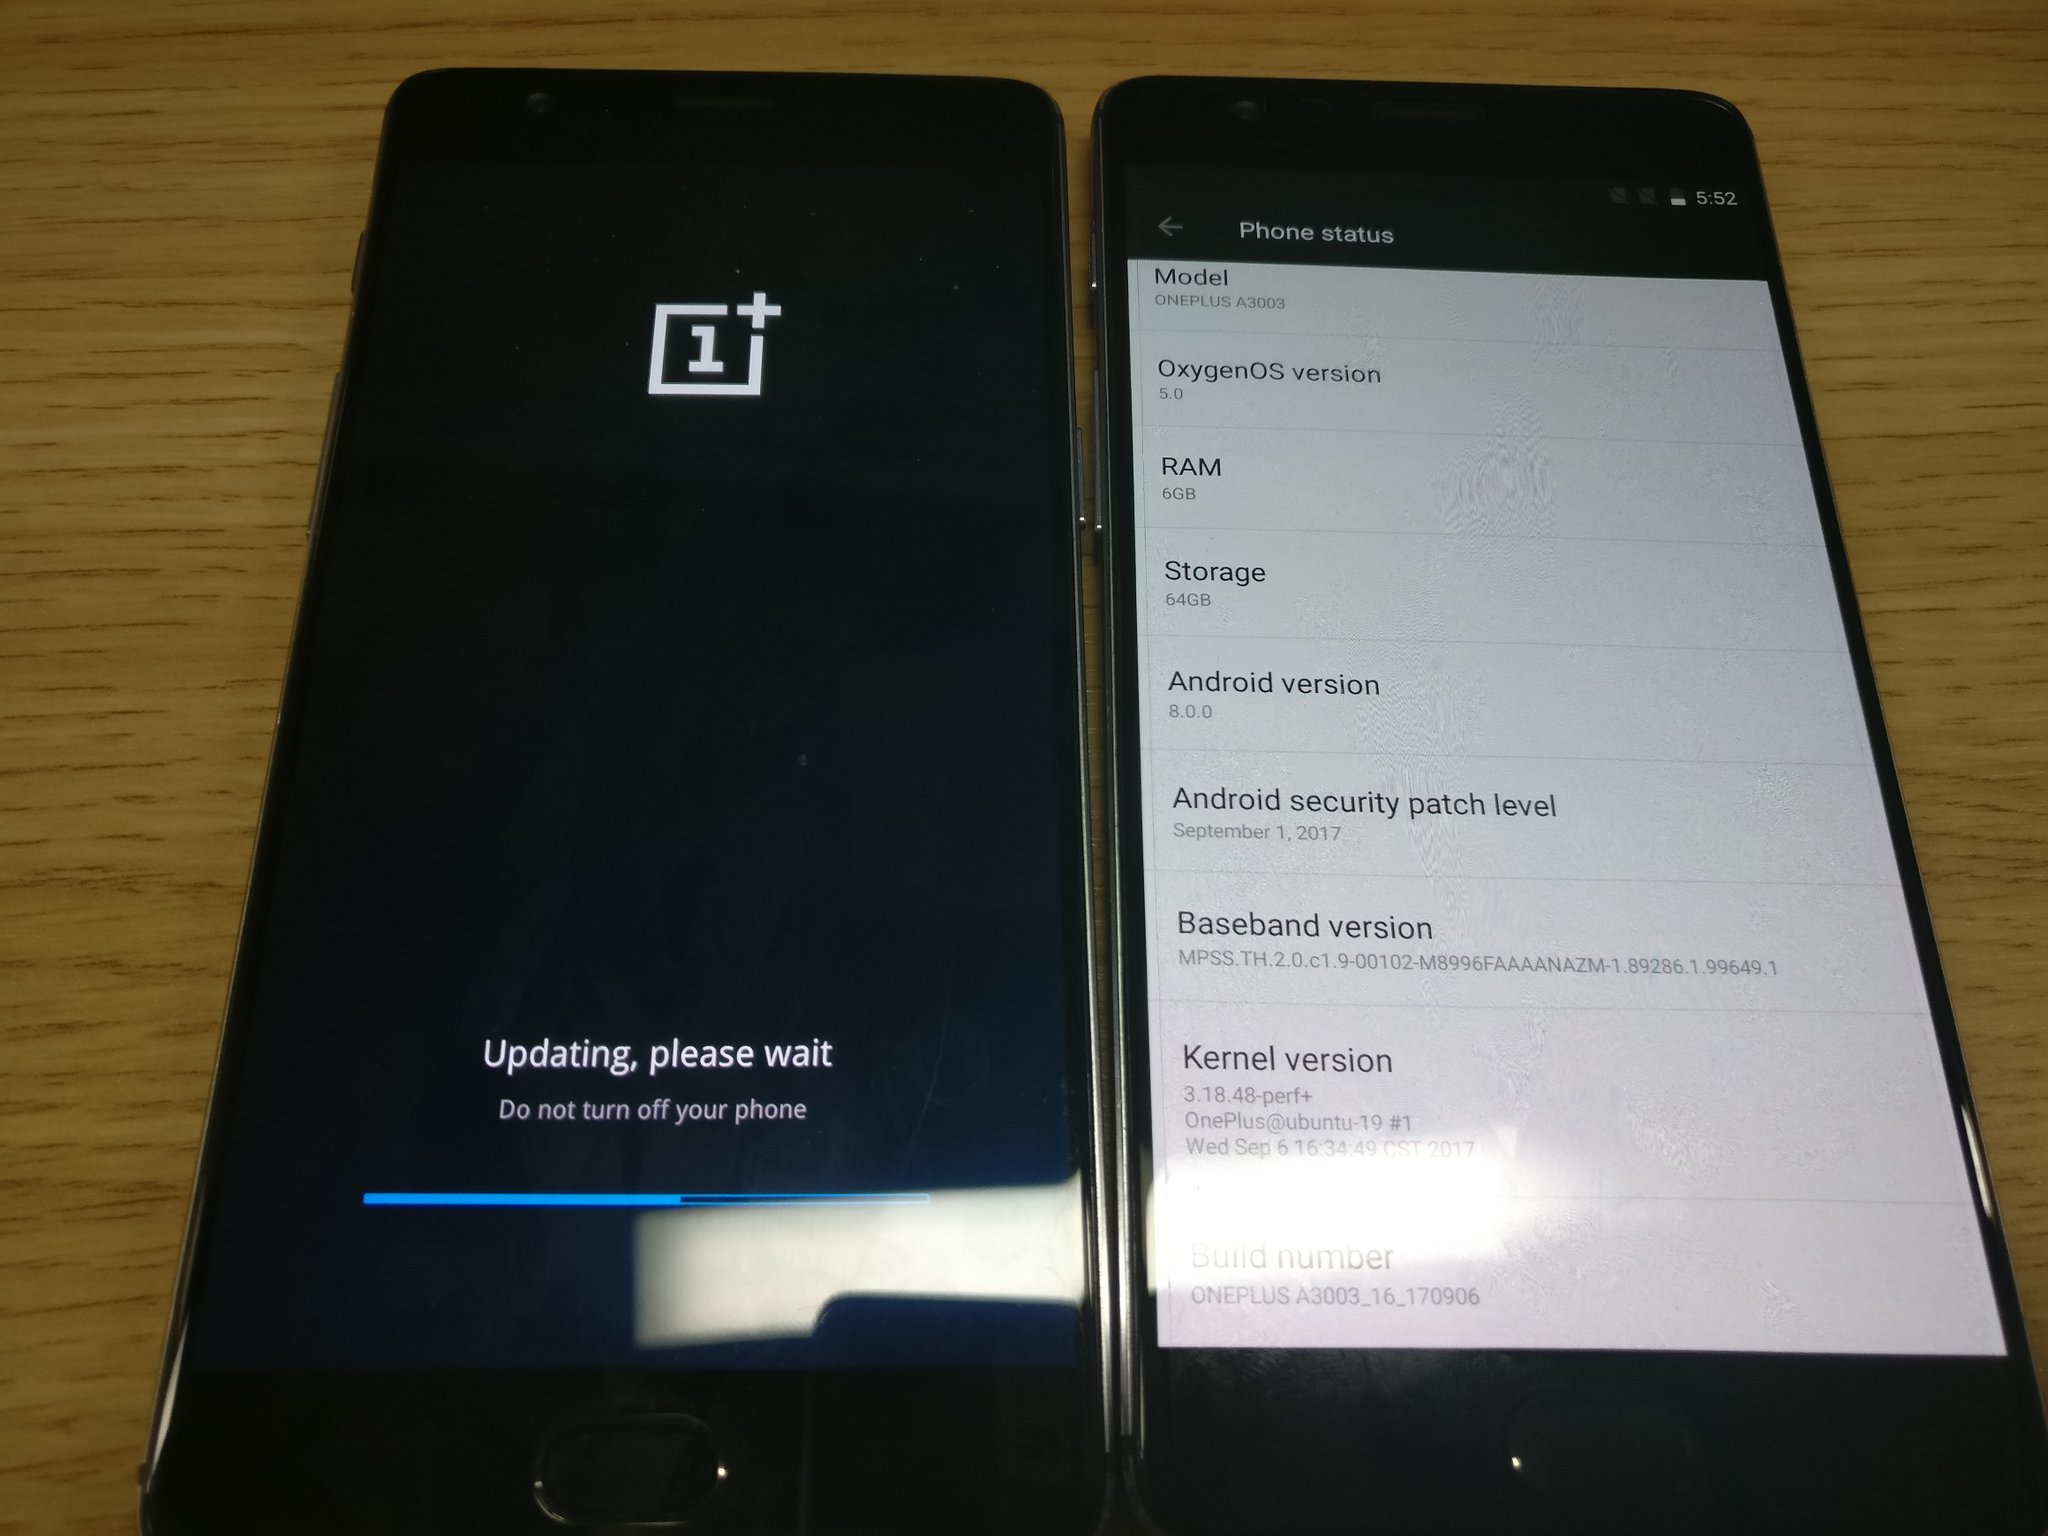 OnePlus 3 Android O closed beta build